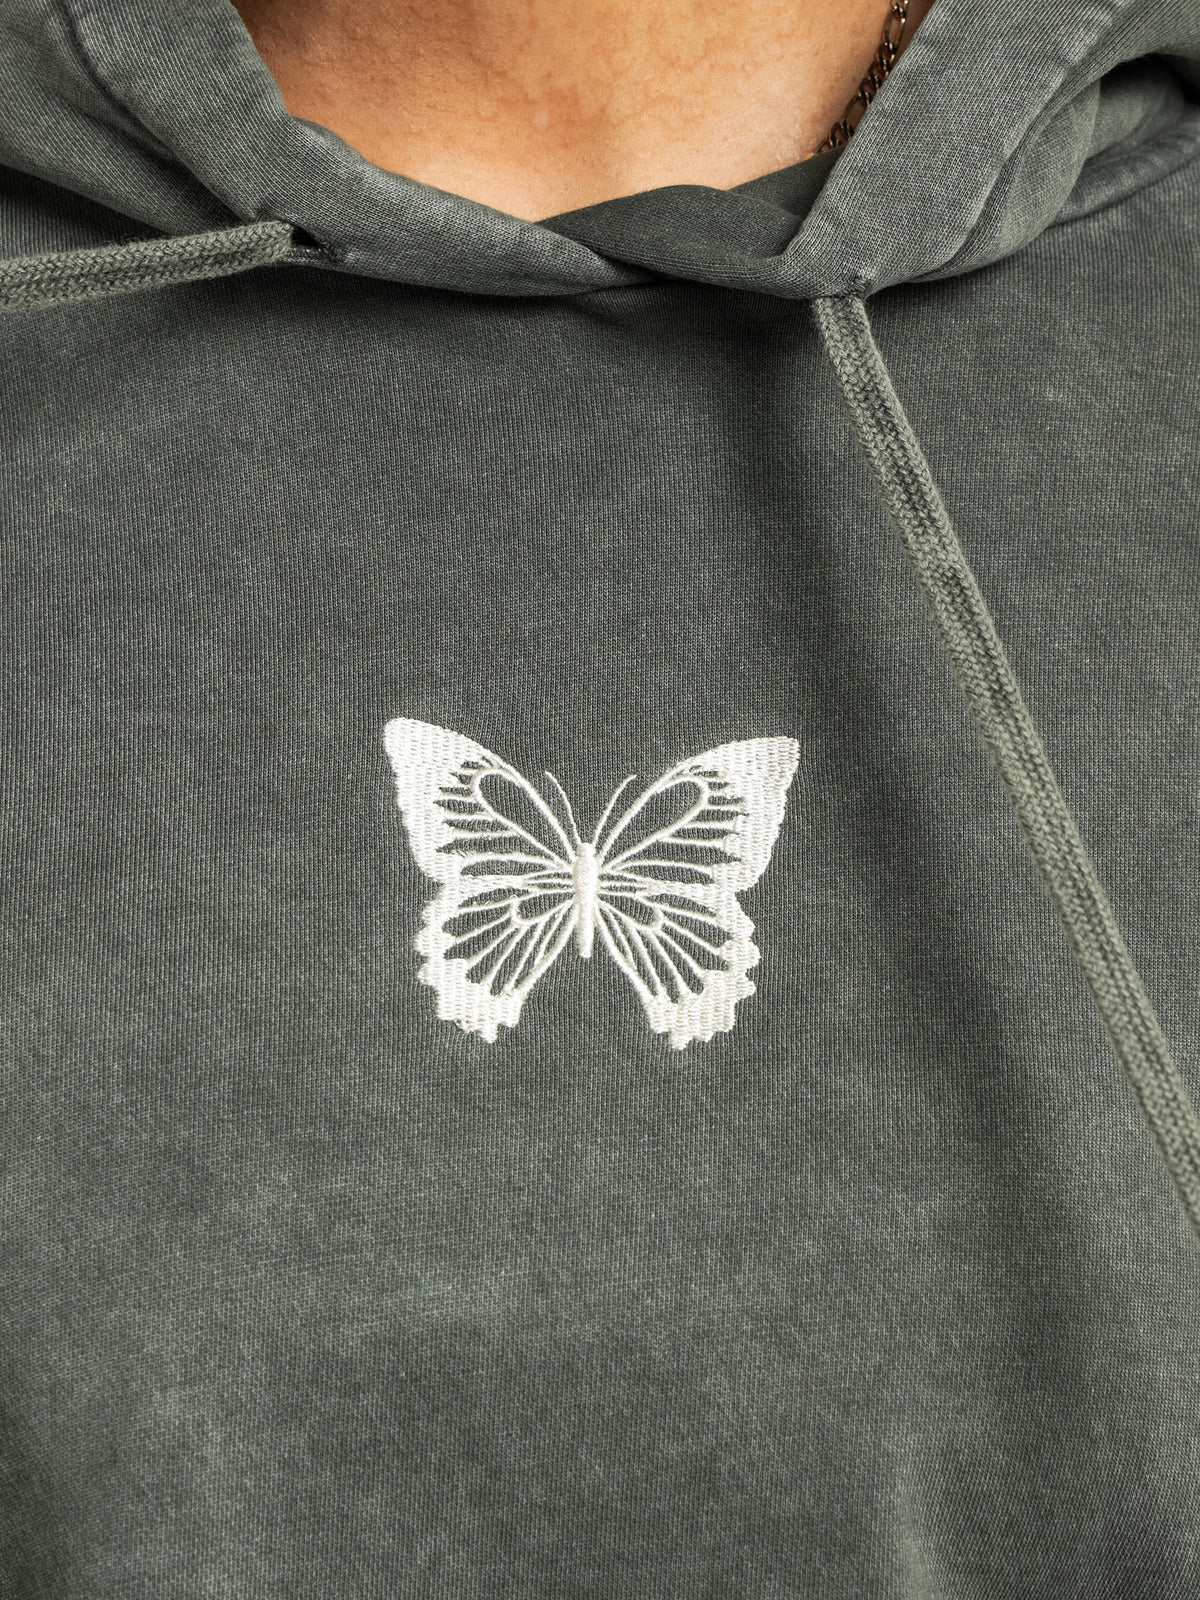 Raina Acid Washed Crop Butterfly Hoodie in Forest Green